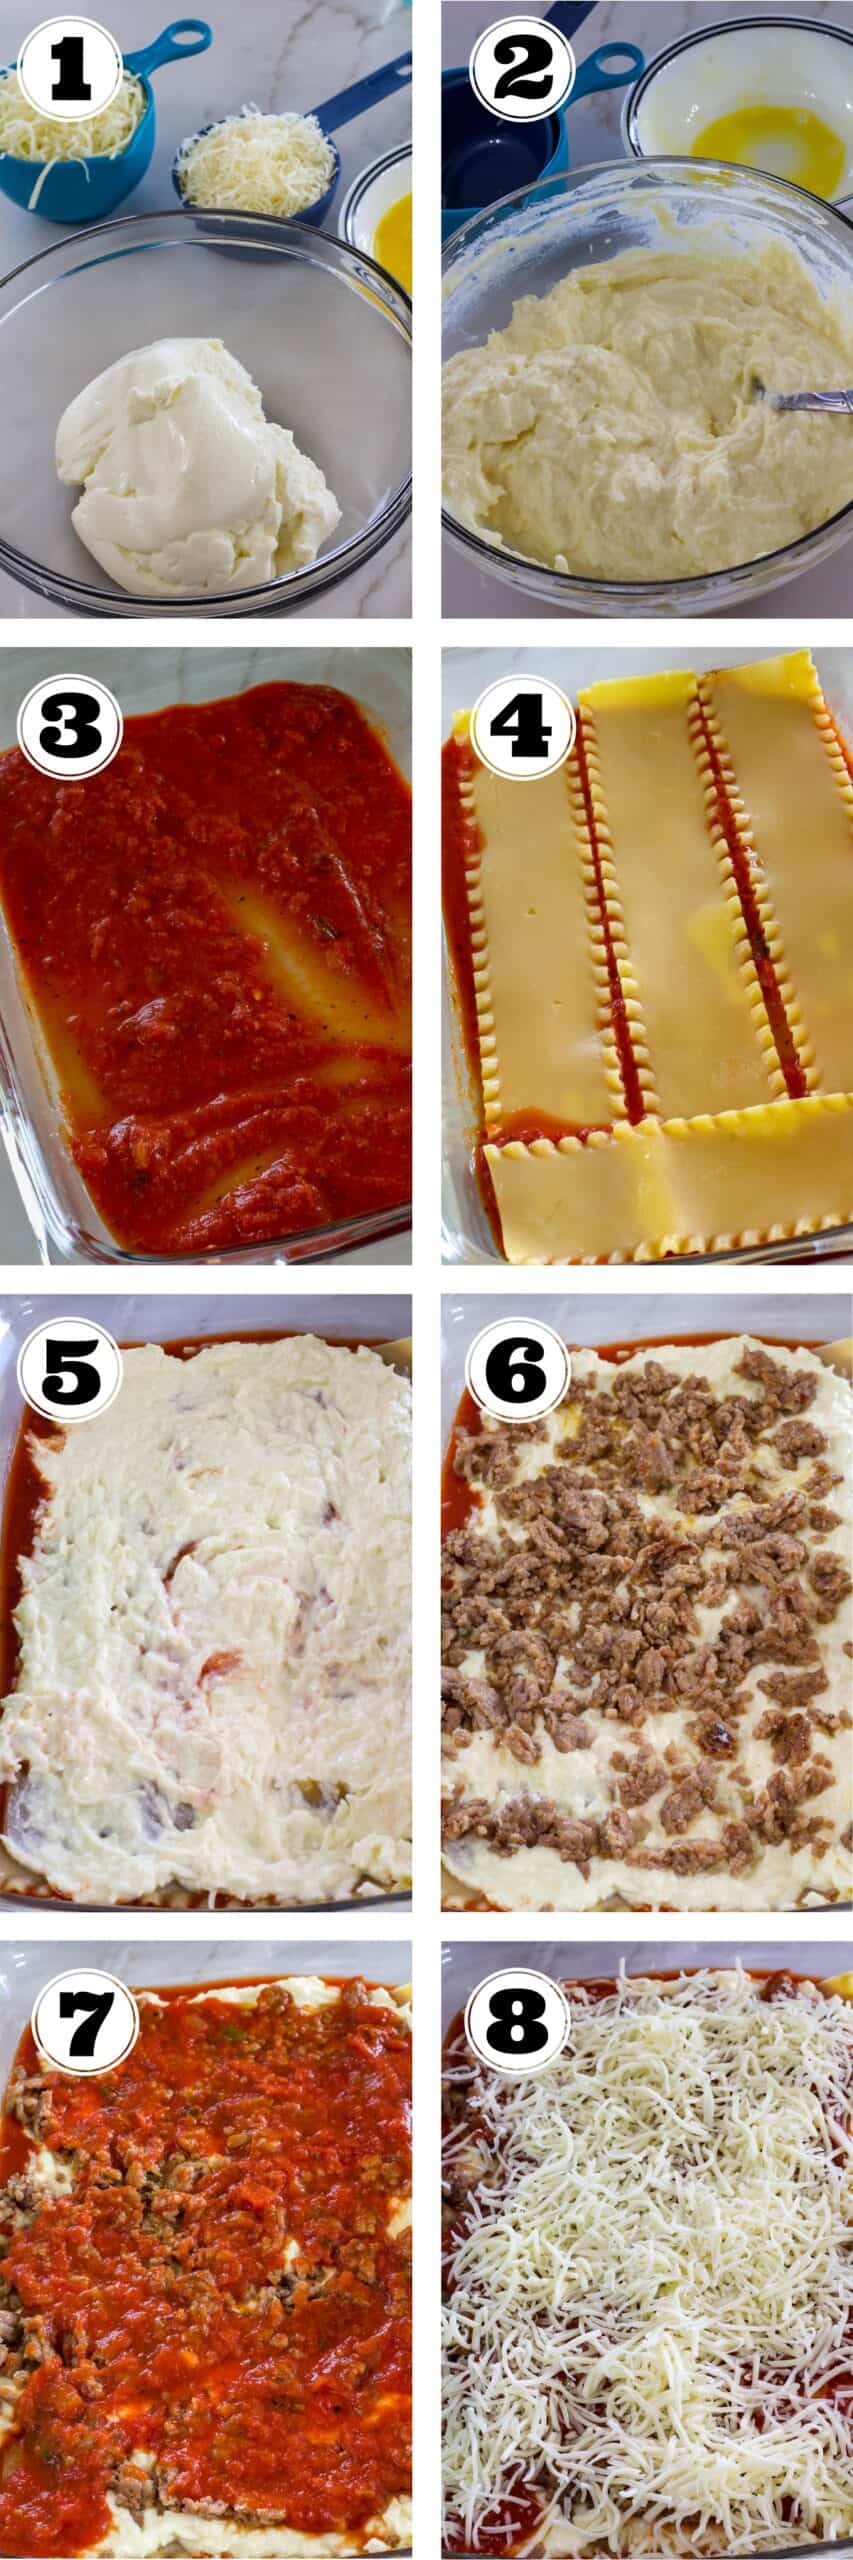 A collage of eight images showing the steps it takes to mix the ricotta cheese and layer the ingredients in the casserole dish.